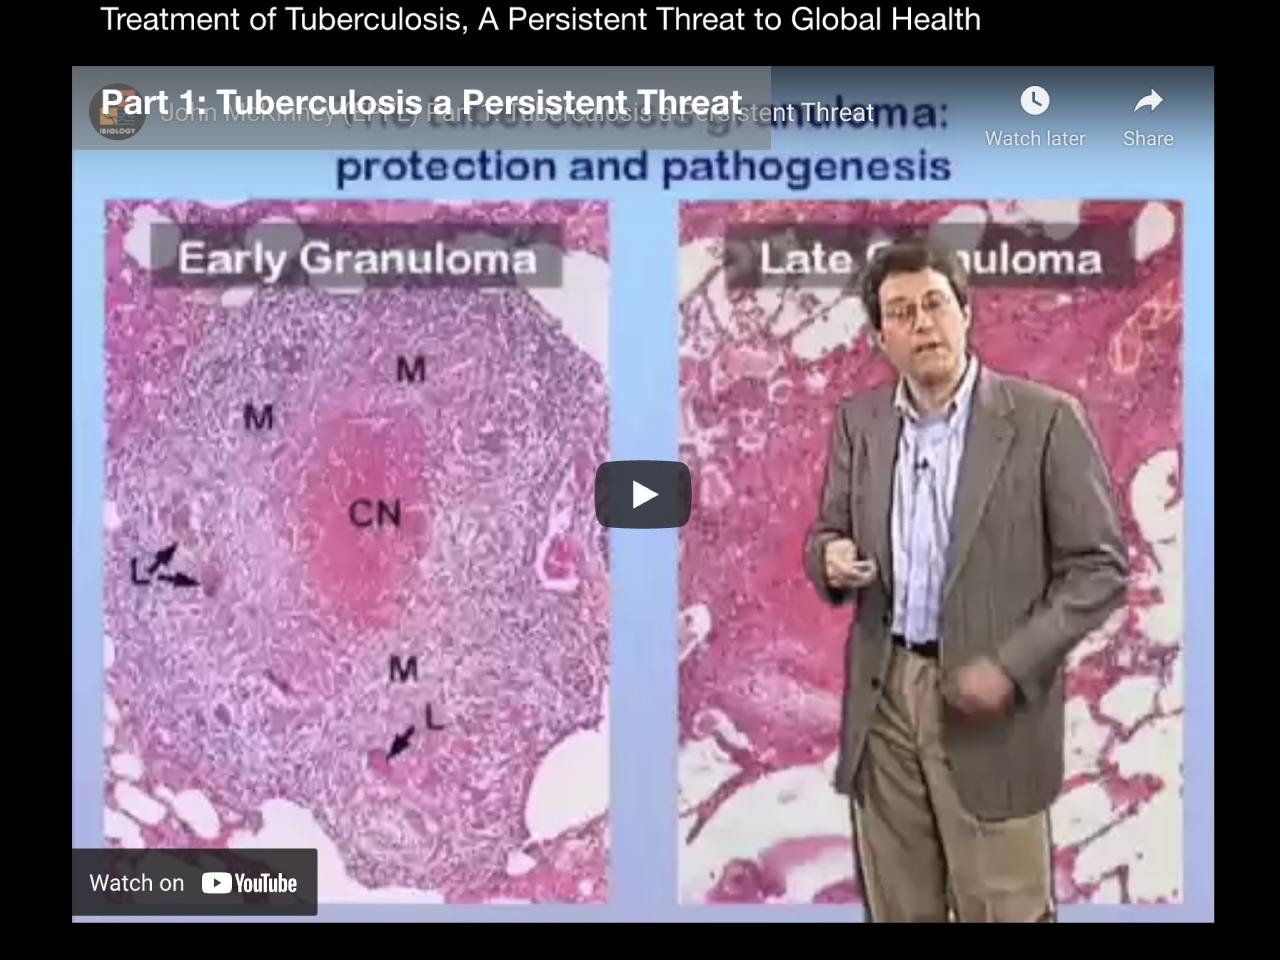 Treatment of Tuberculosis, A Persistent Threat to Global Health